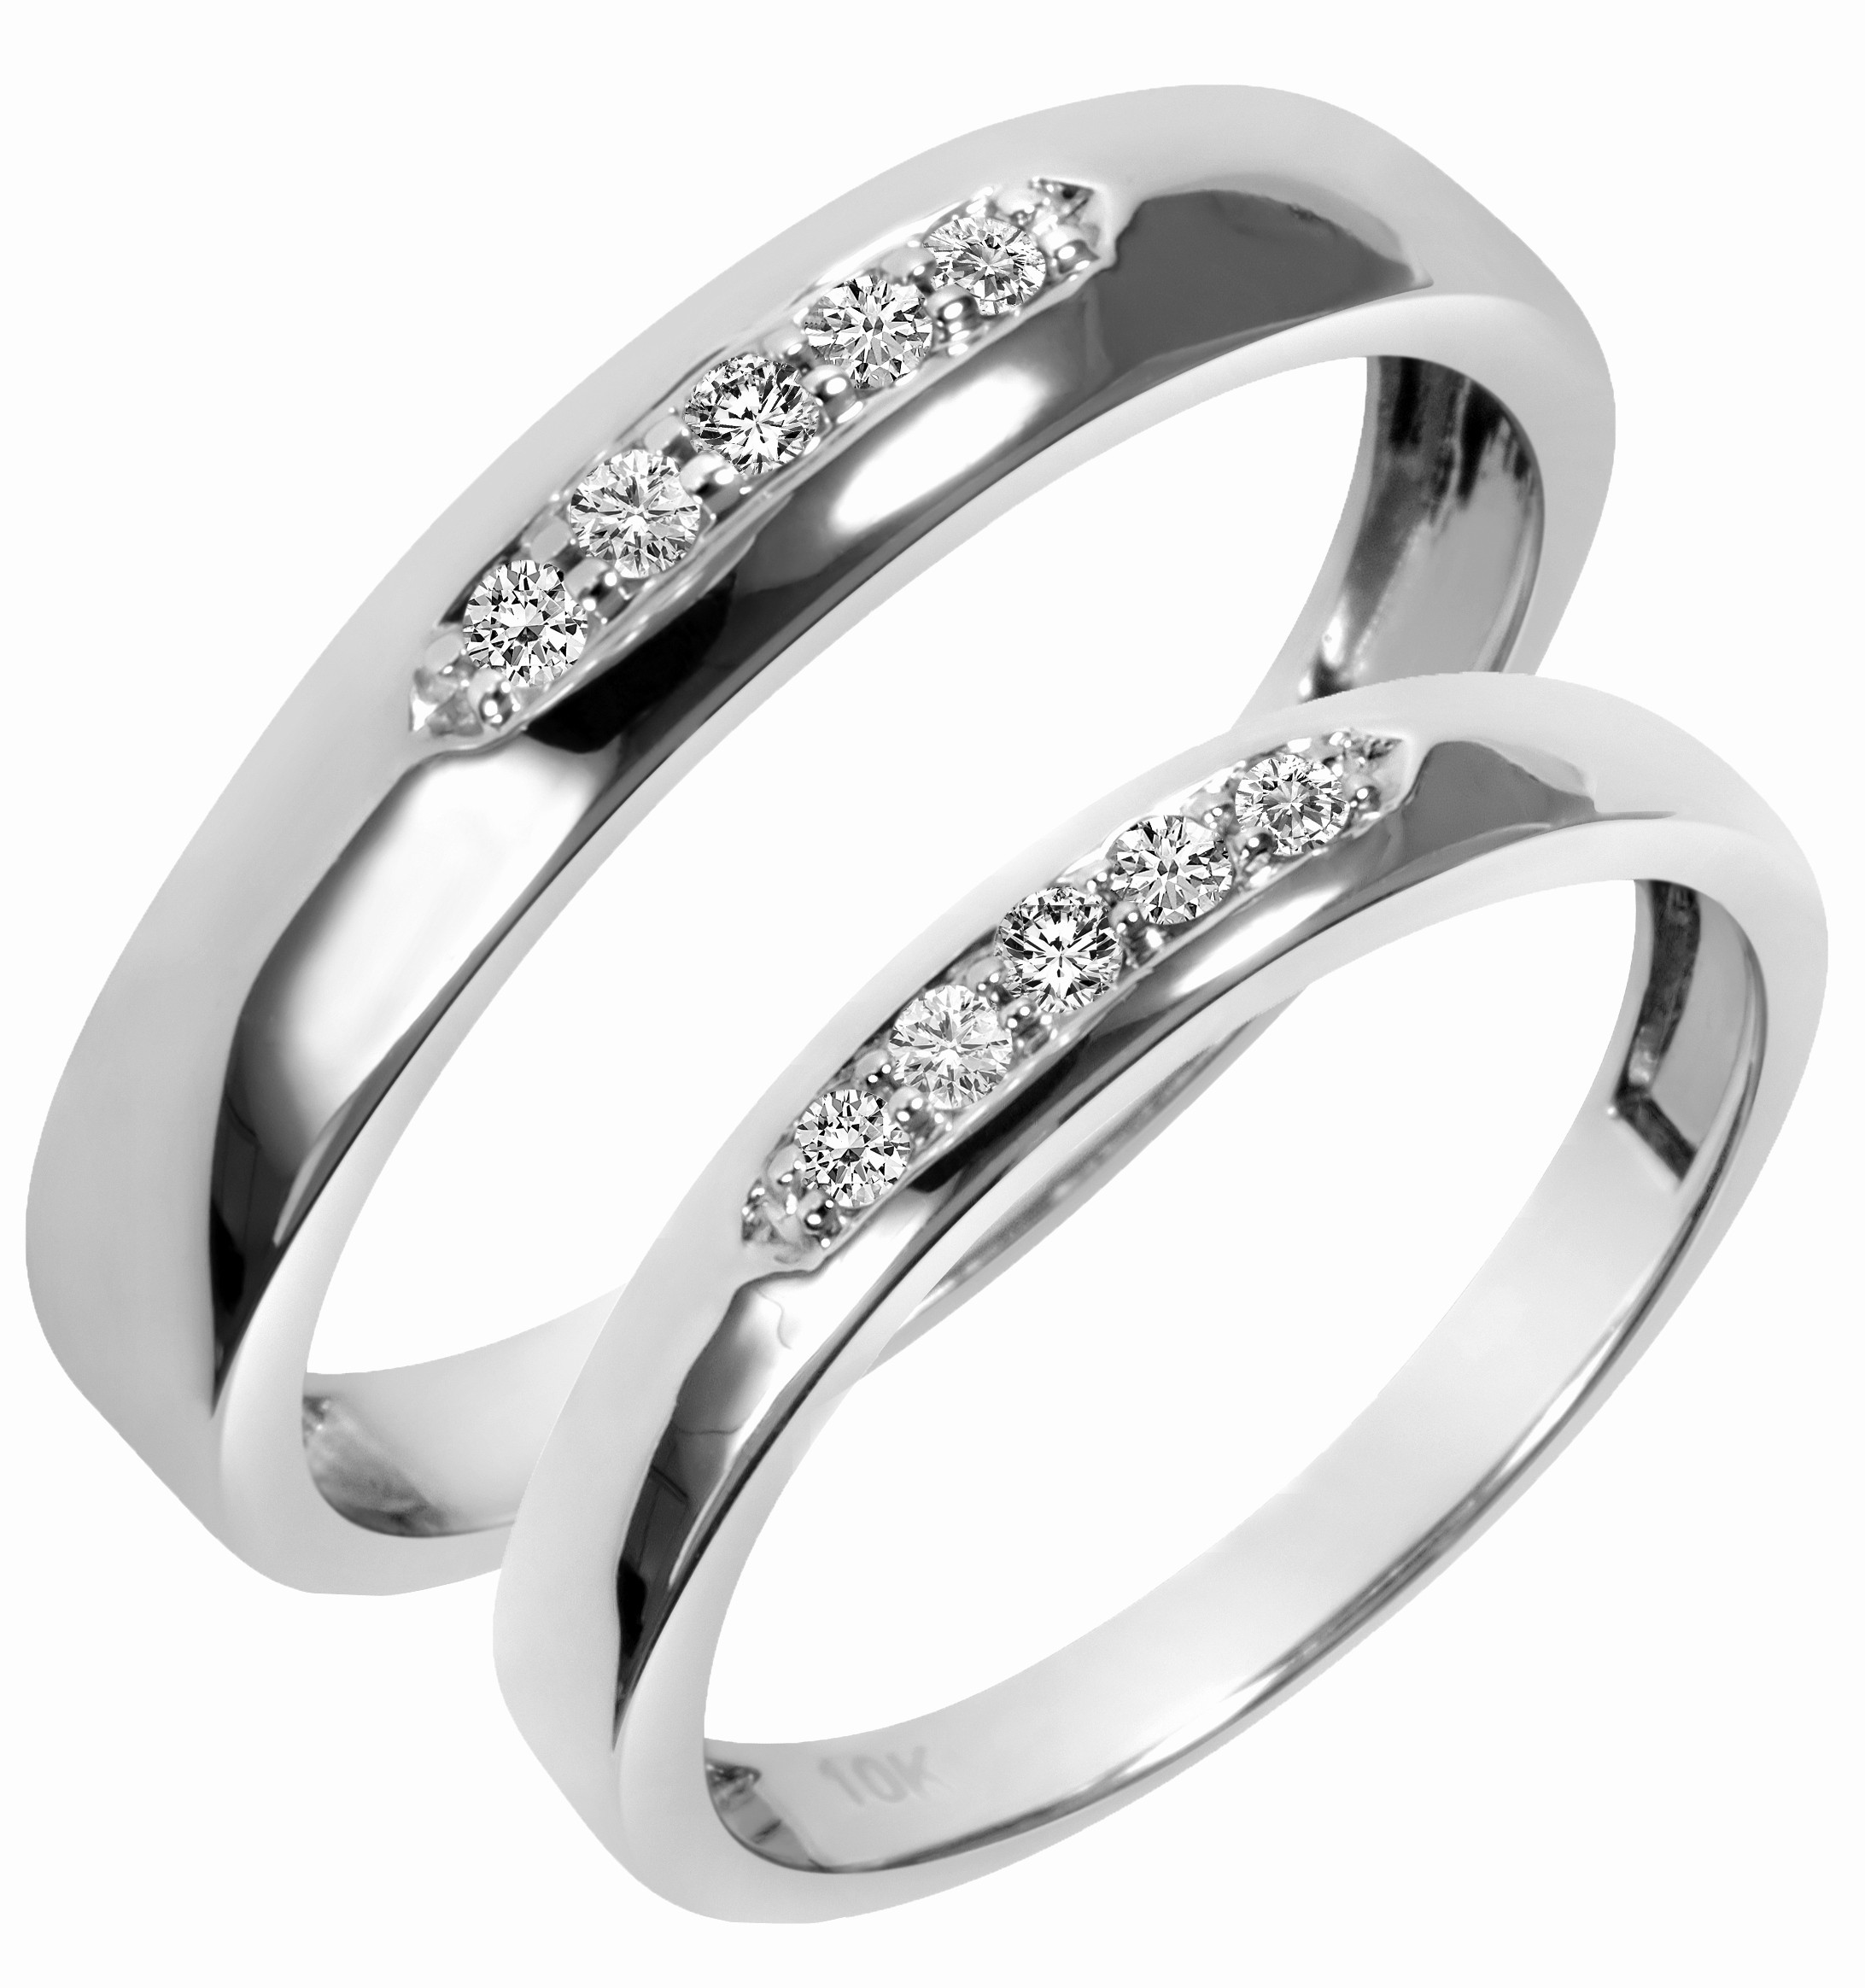 Zales Wedding Ring Sets For Him And Her
 Wedding Rings Spectacular Zales Wedding Sets For Best